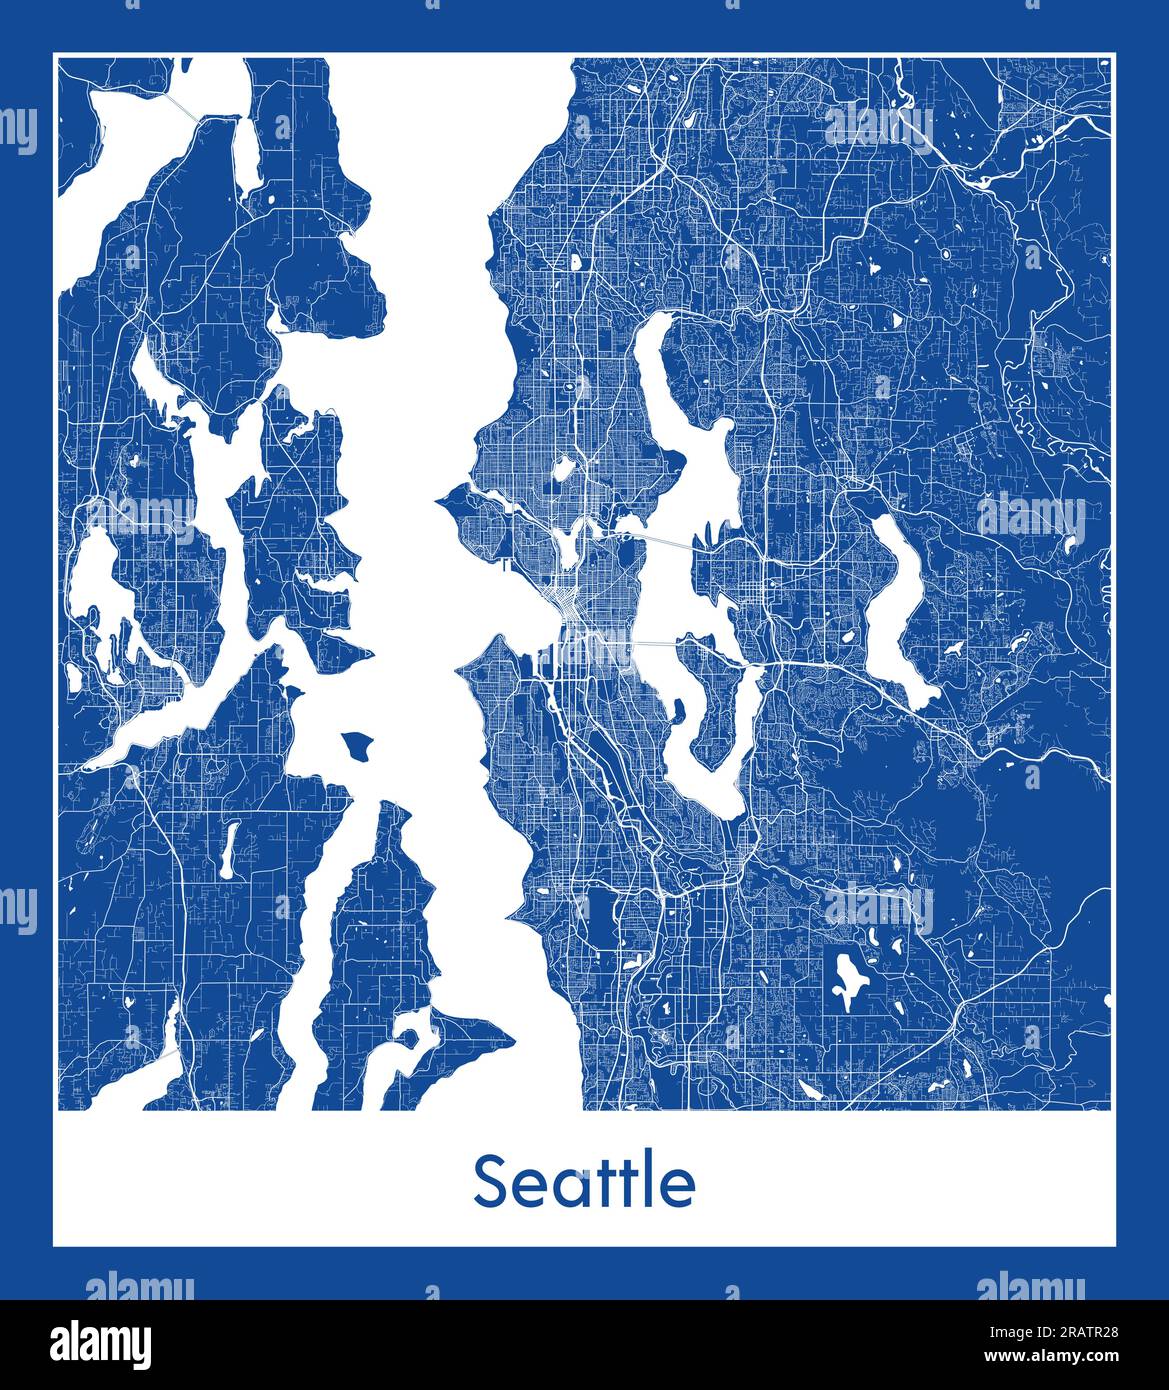 Seattle United States North America City Map Blue Print Vector Illustration Stock Vector Image 1876